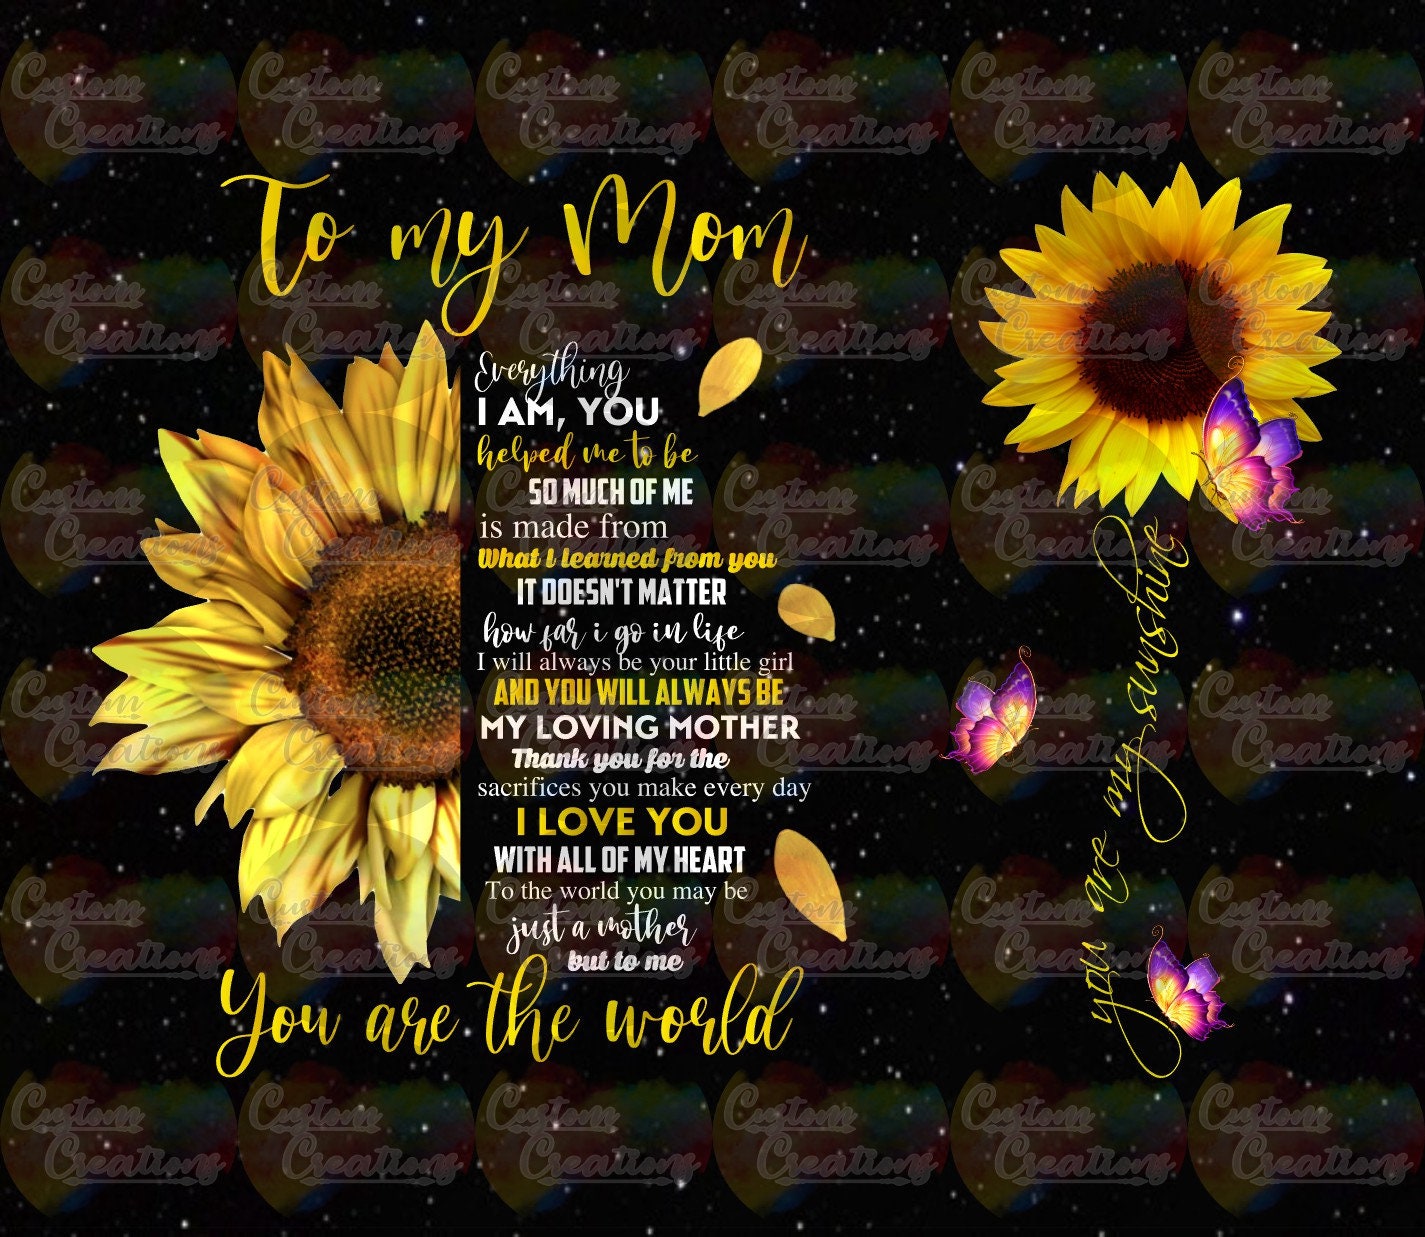 To My Mom You Are The World Sunflower I Love You Image Digital File Download JPEG, PNG